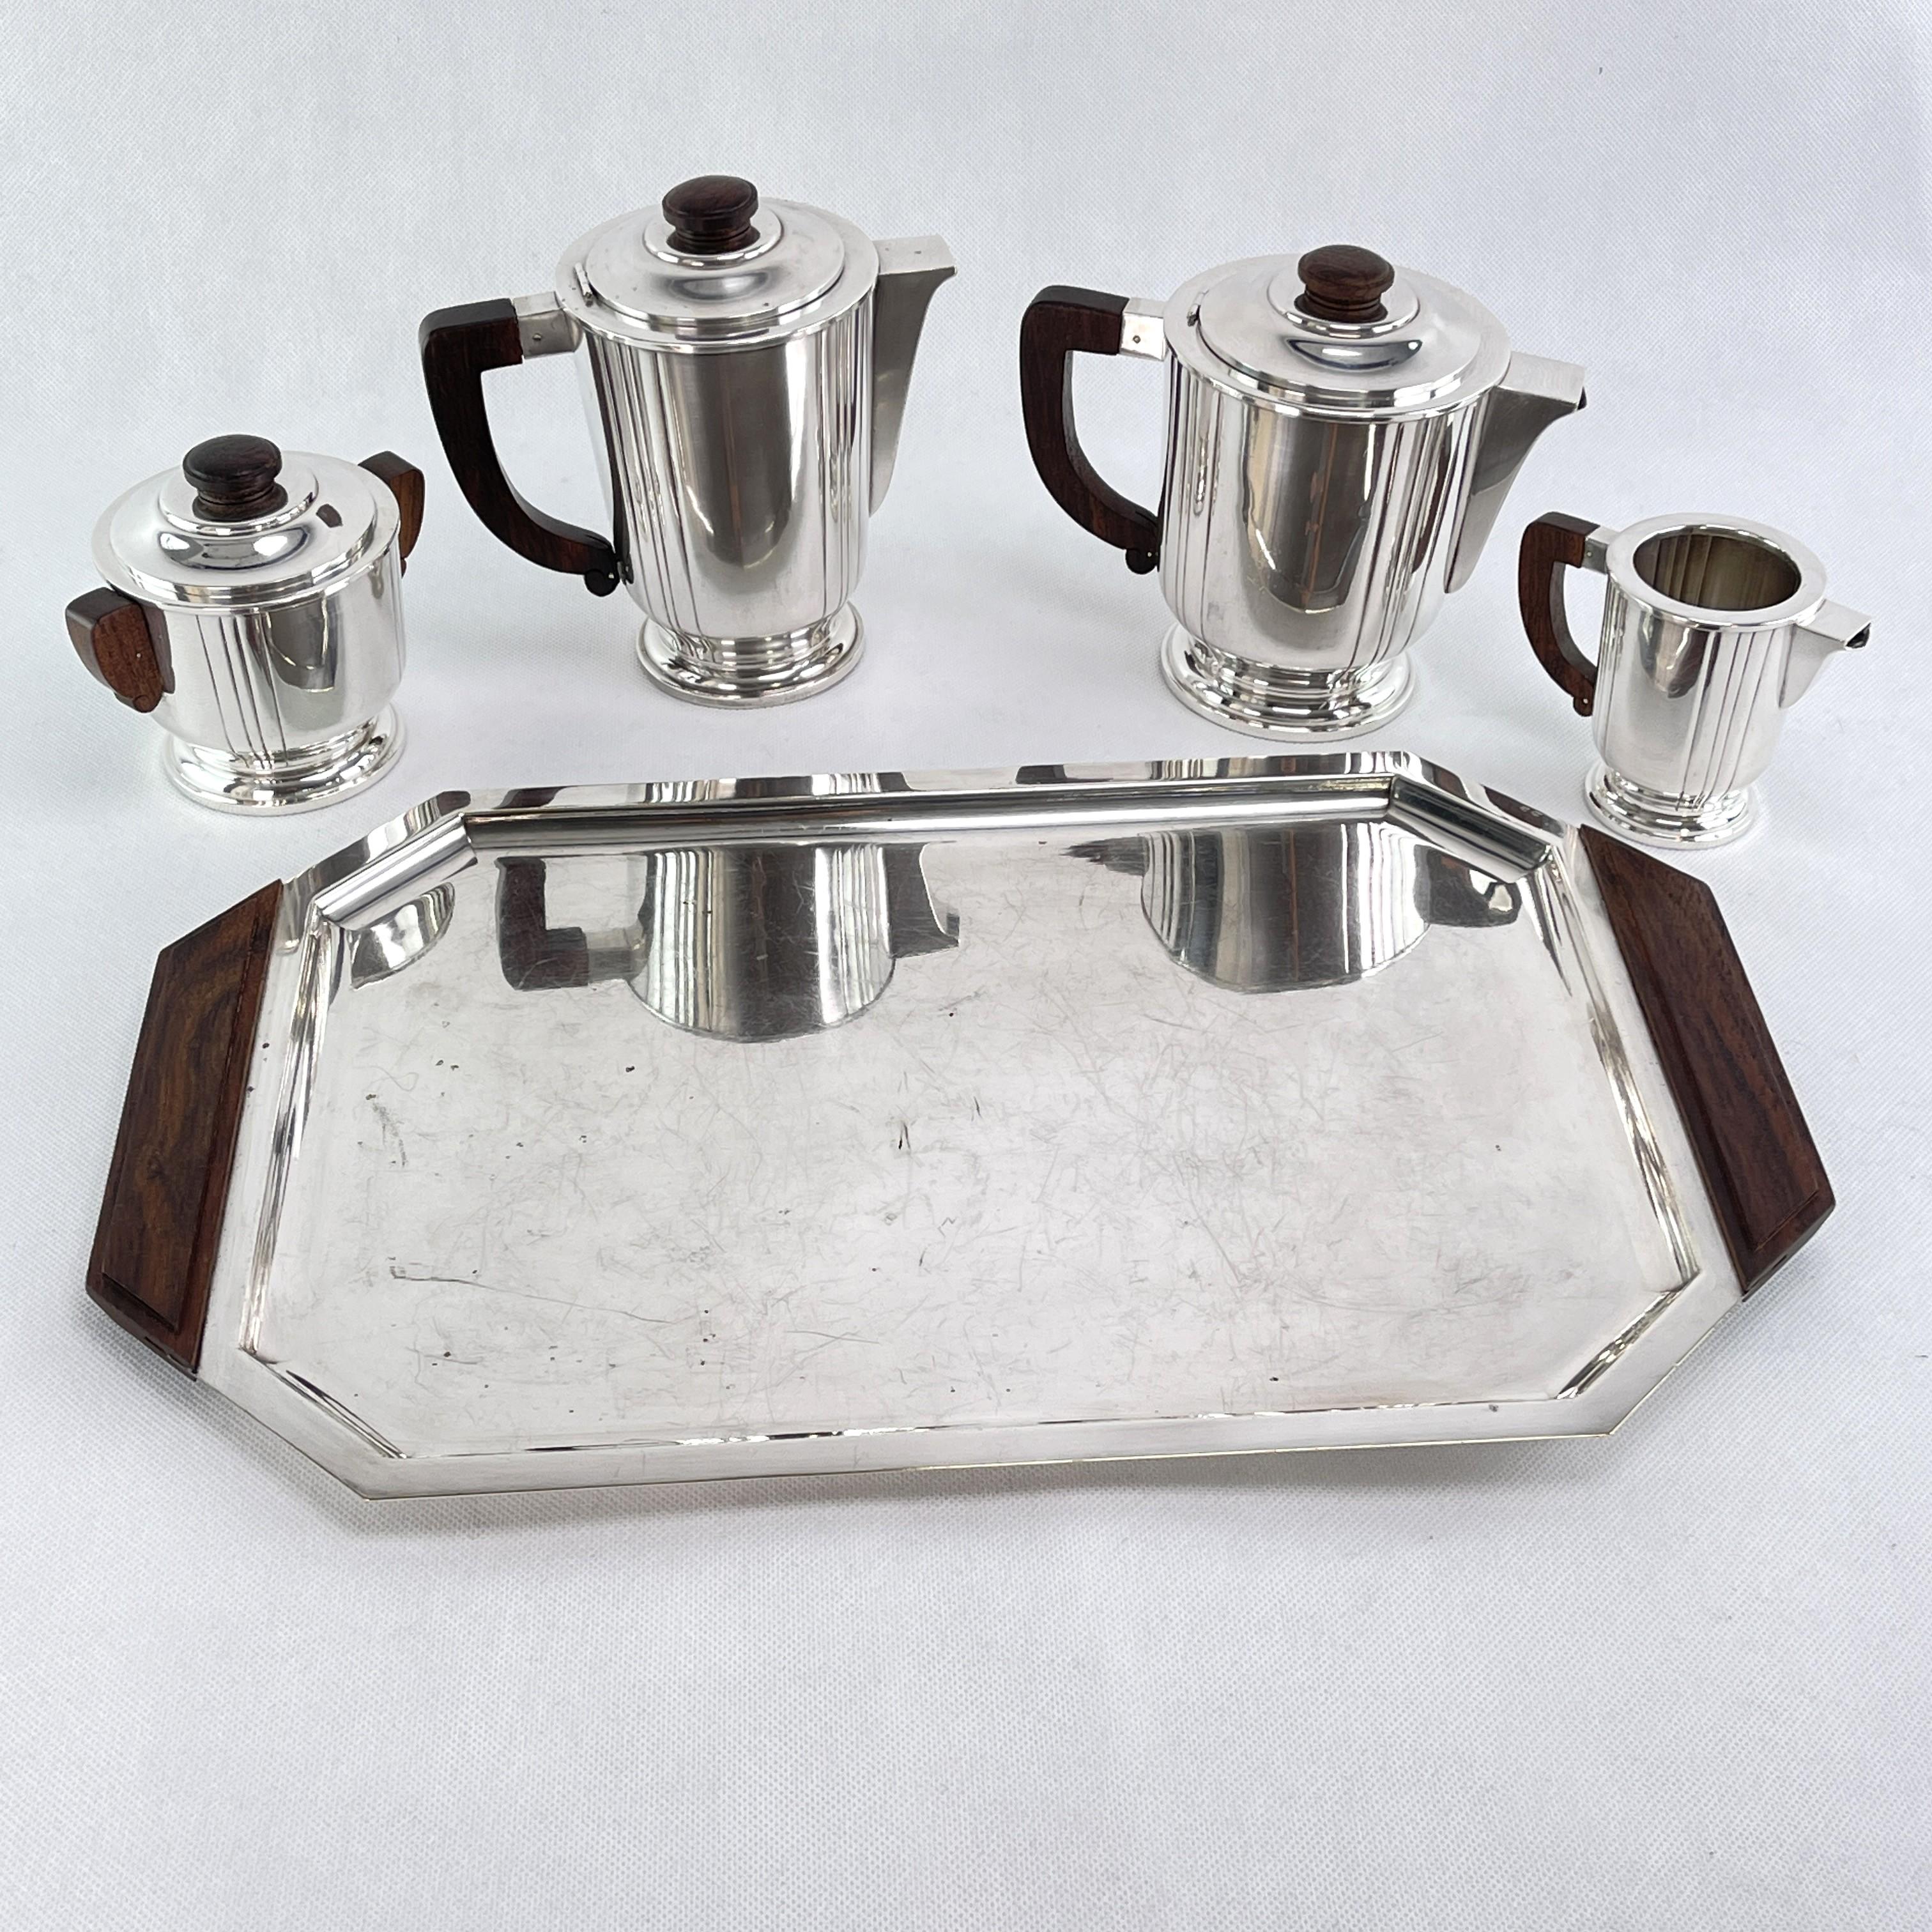 Coffee/tea set - 1920s

This coffee set from the 1920s is in the typical style of the streamline modern. It includes a coffee pot, teapot, sugar bowl, creamer and a handled tray.

The mesures only refer to the handled tray.

Further